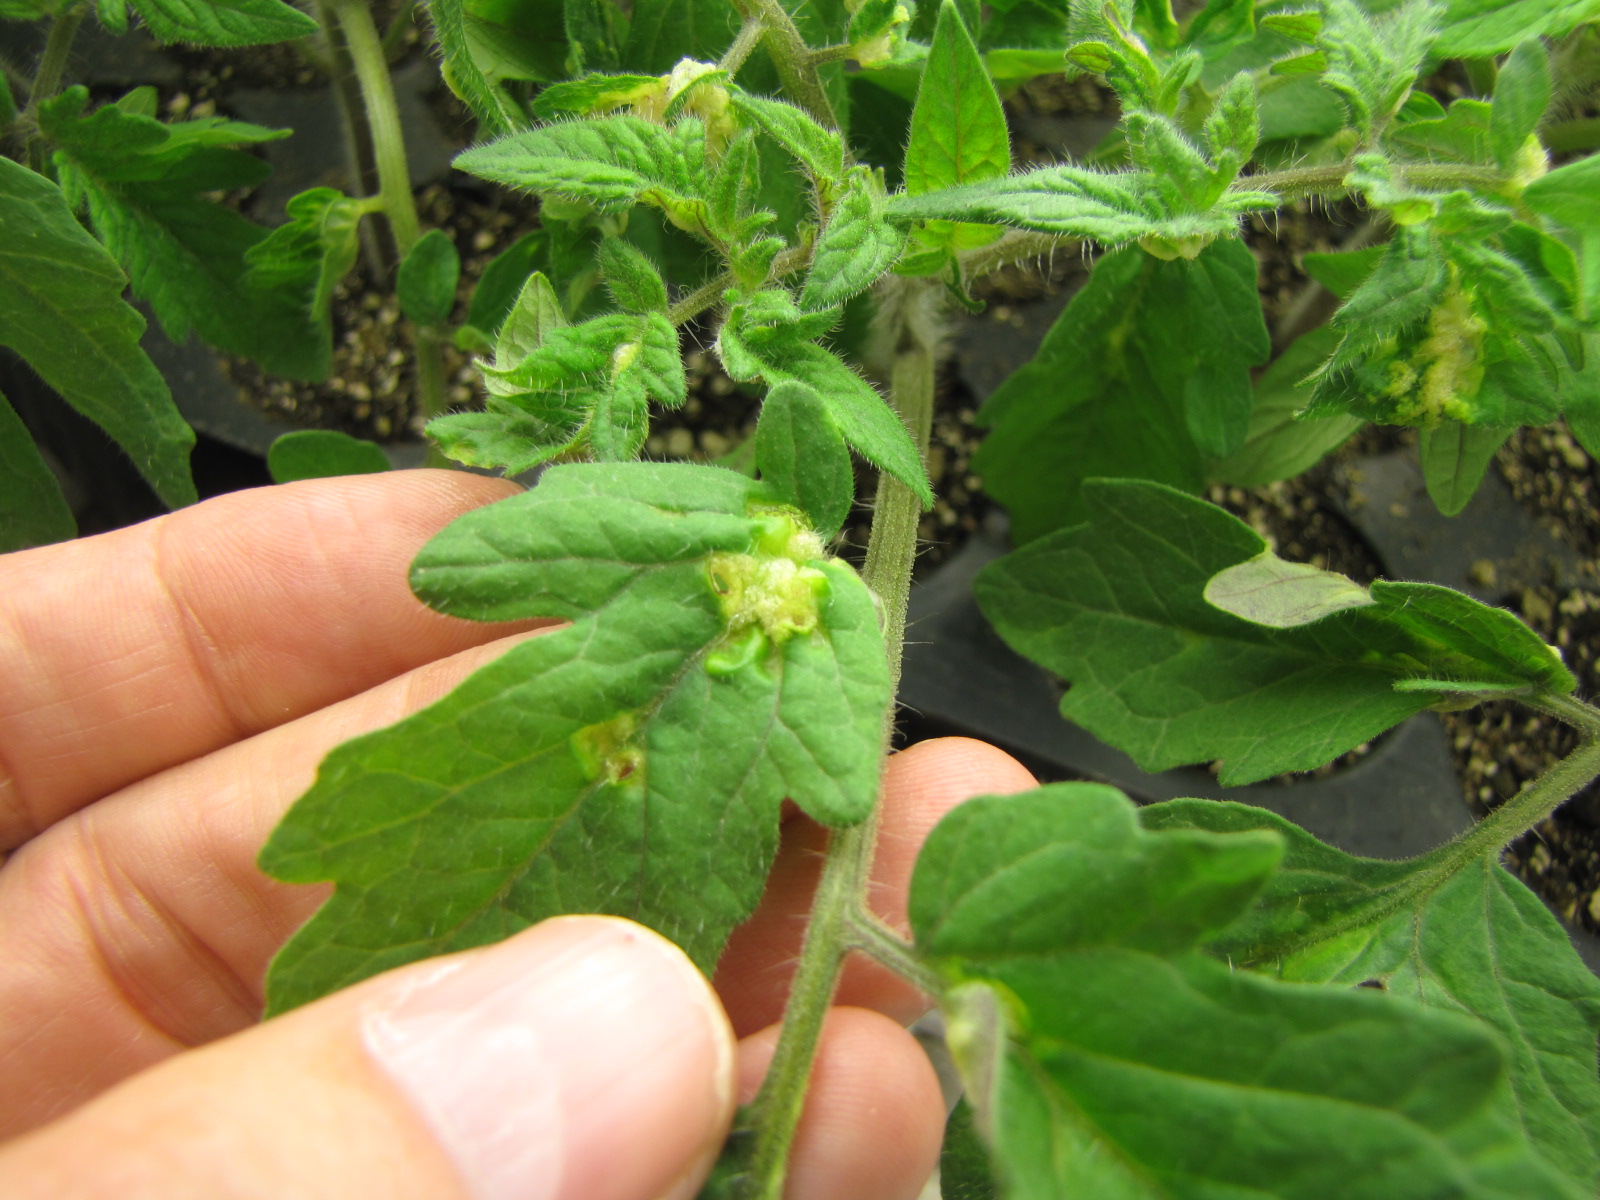 Intumescence on tomato leaves in a growth chamber.